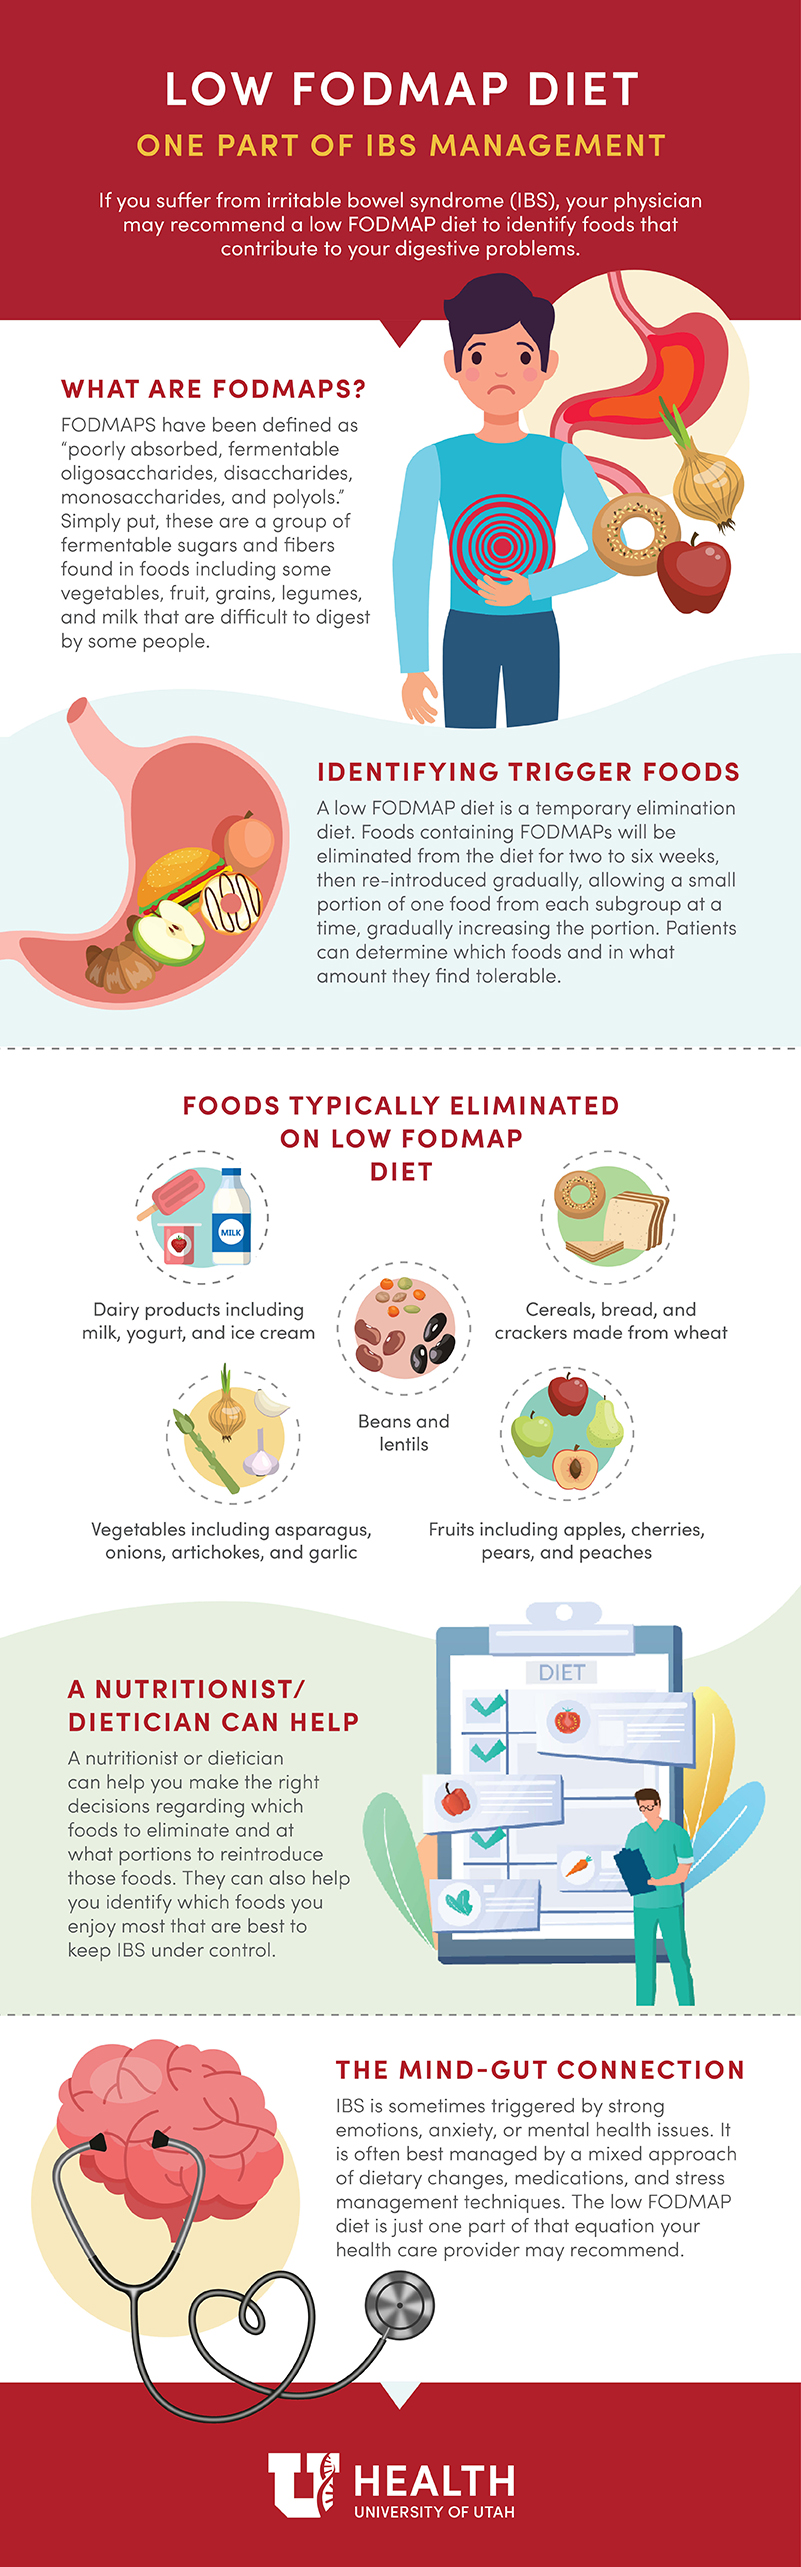 Infographic explains how a FODMAP diet may help with digestive problems.